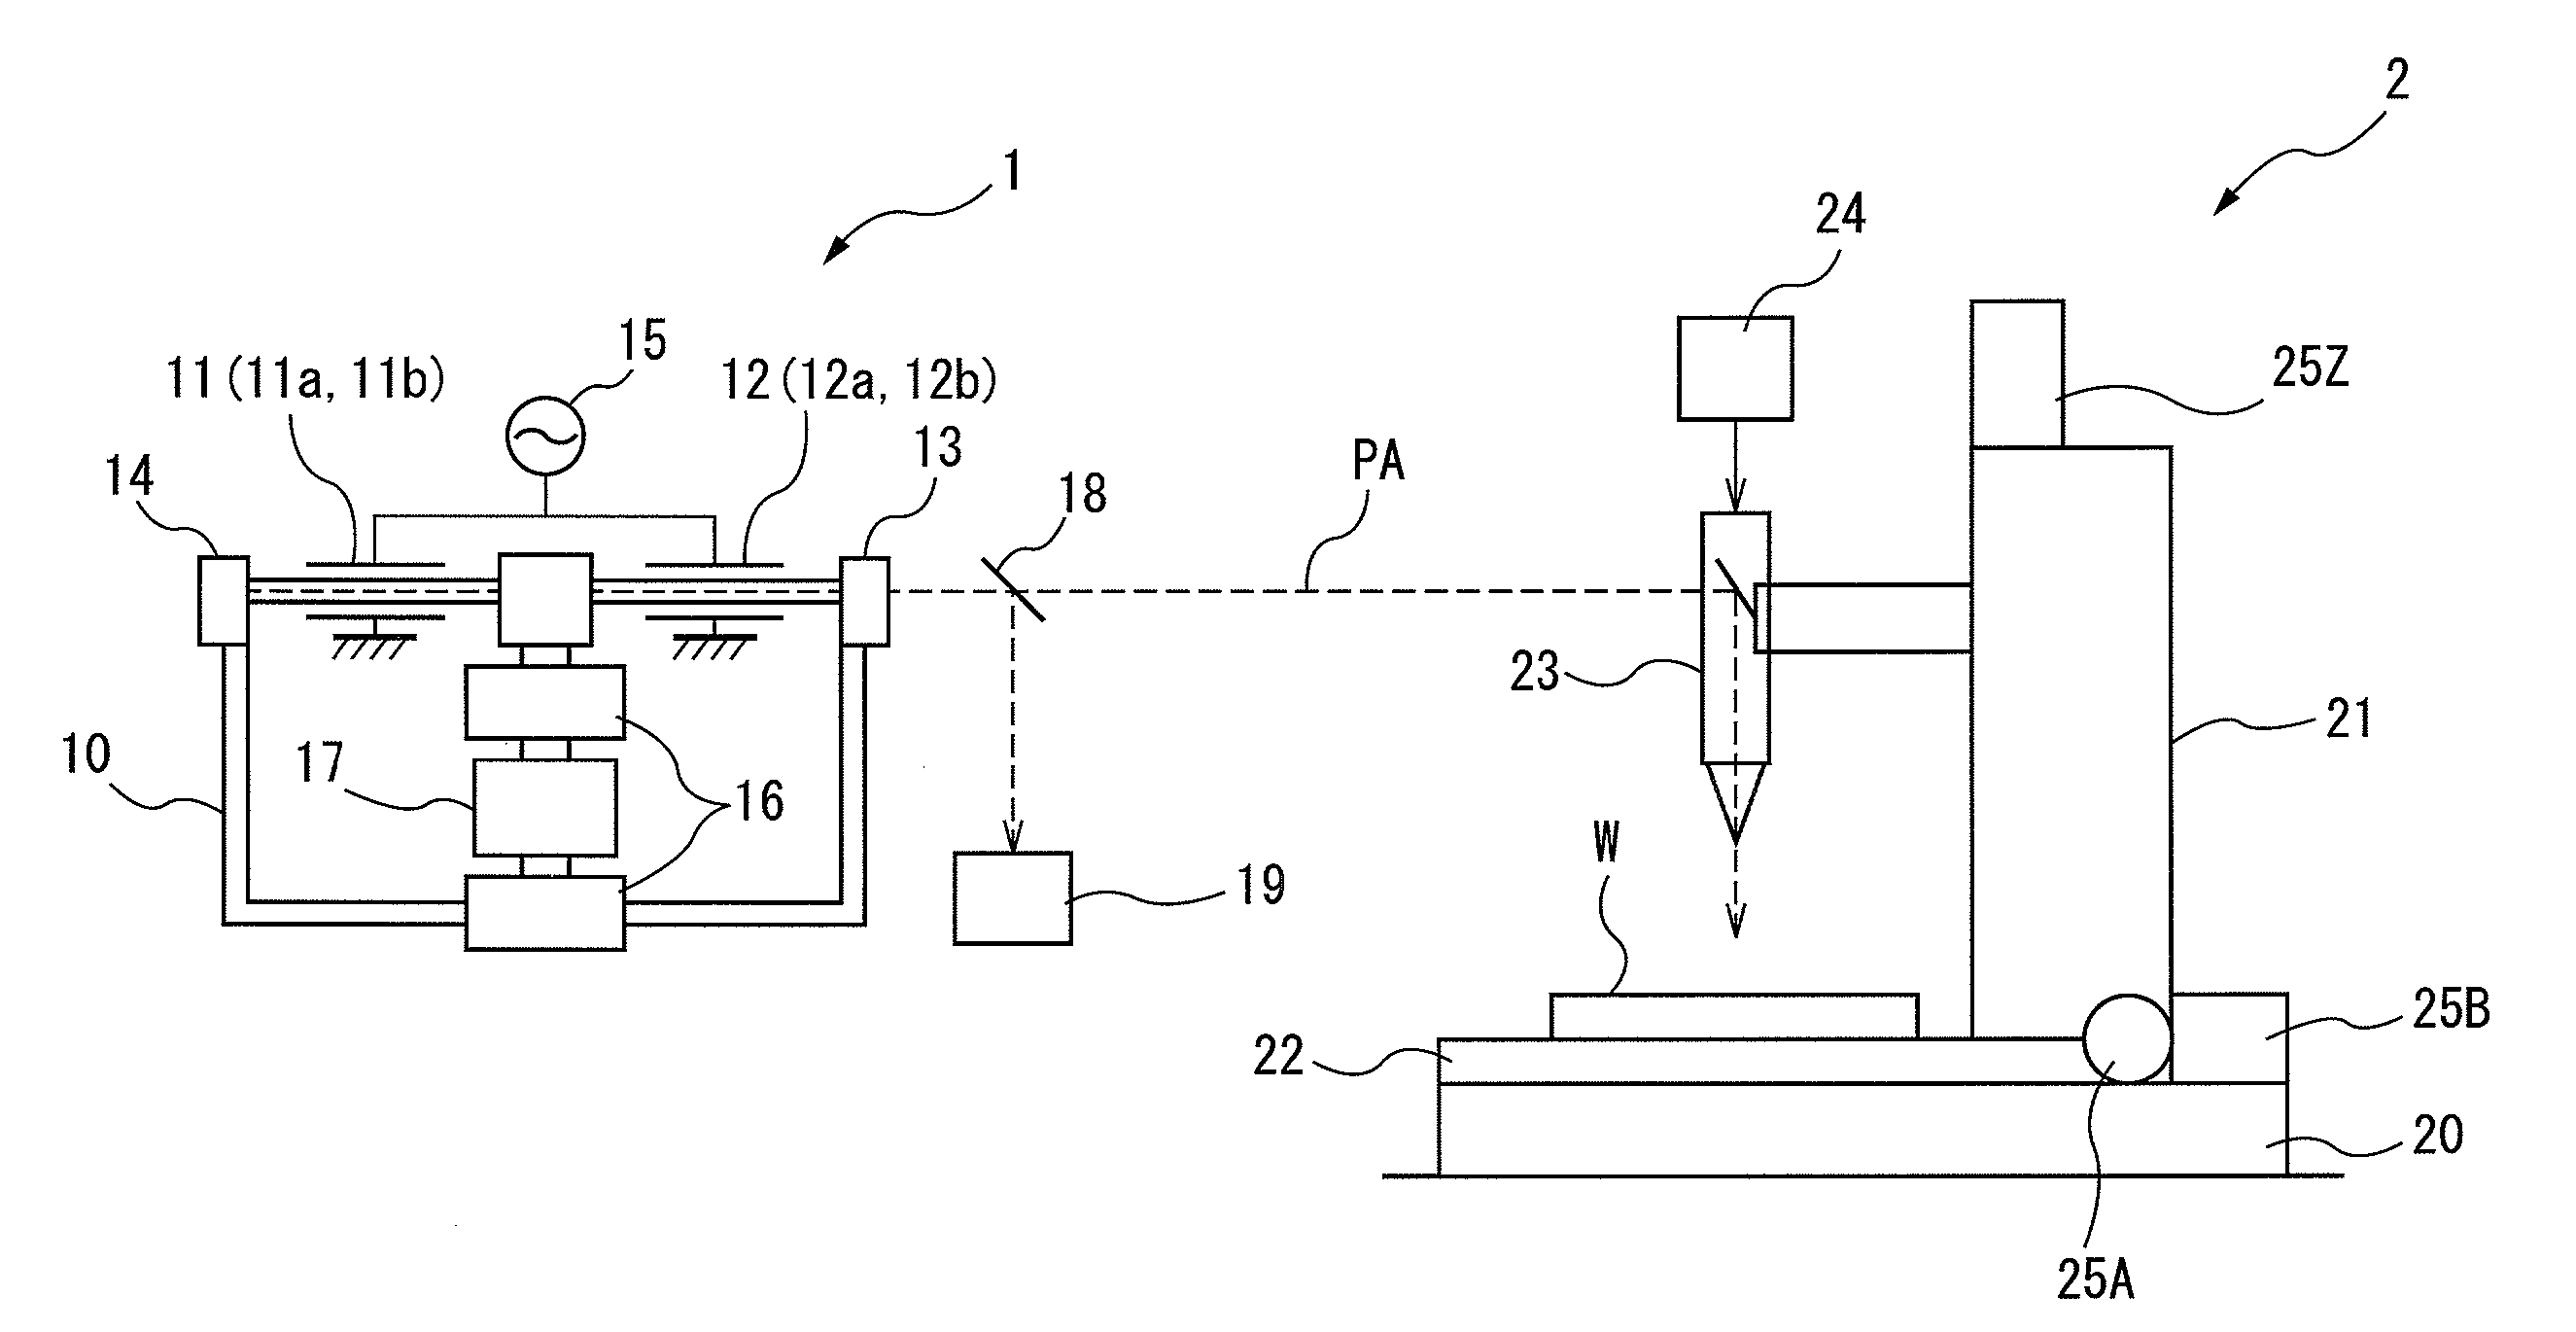 Laser processing apparatus carrying out control to reduce consumed power